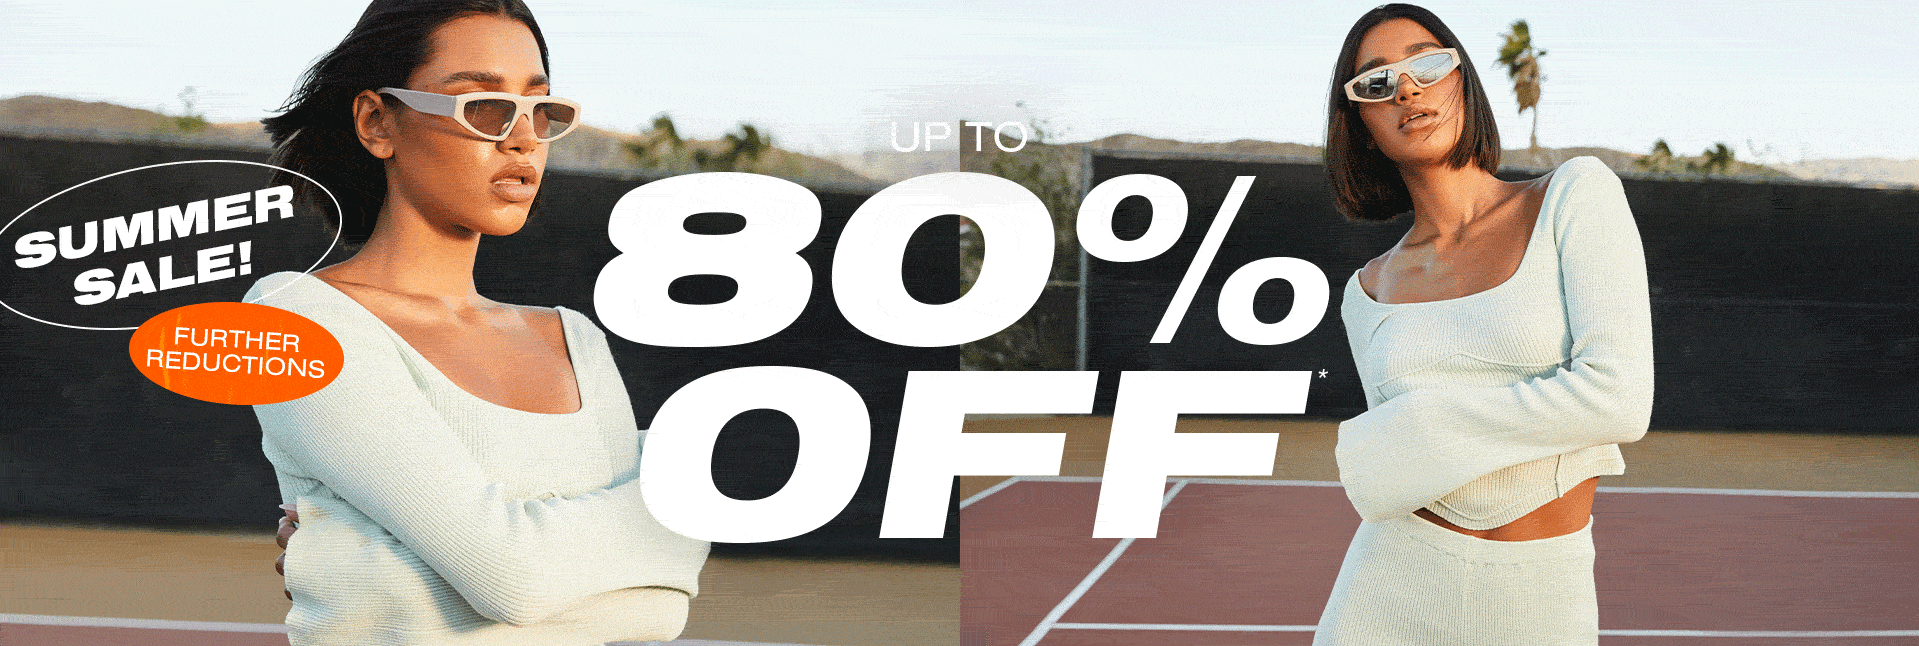 Up to 50% Off Summer!